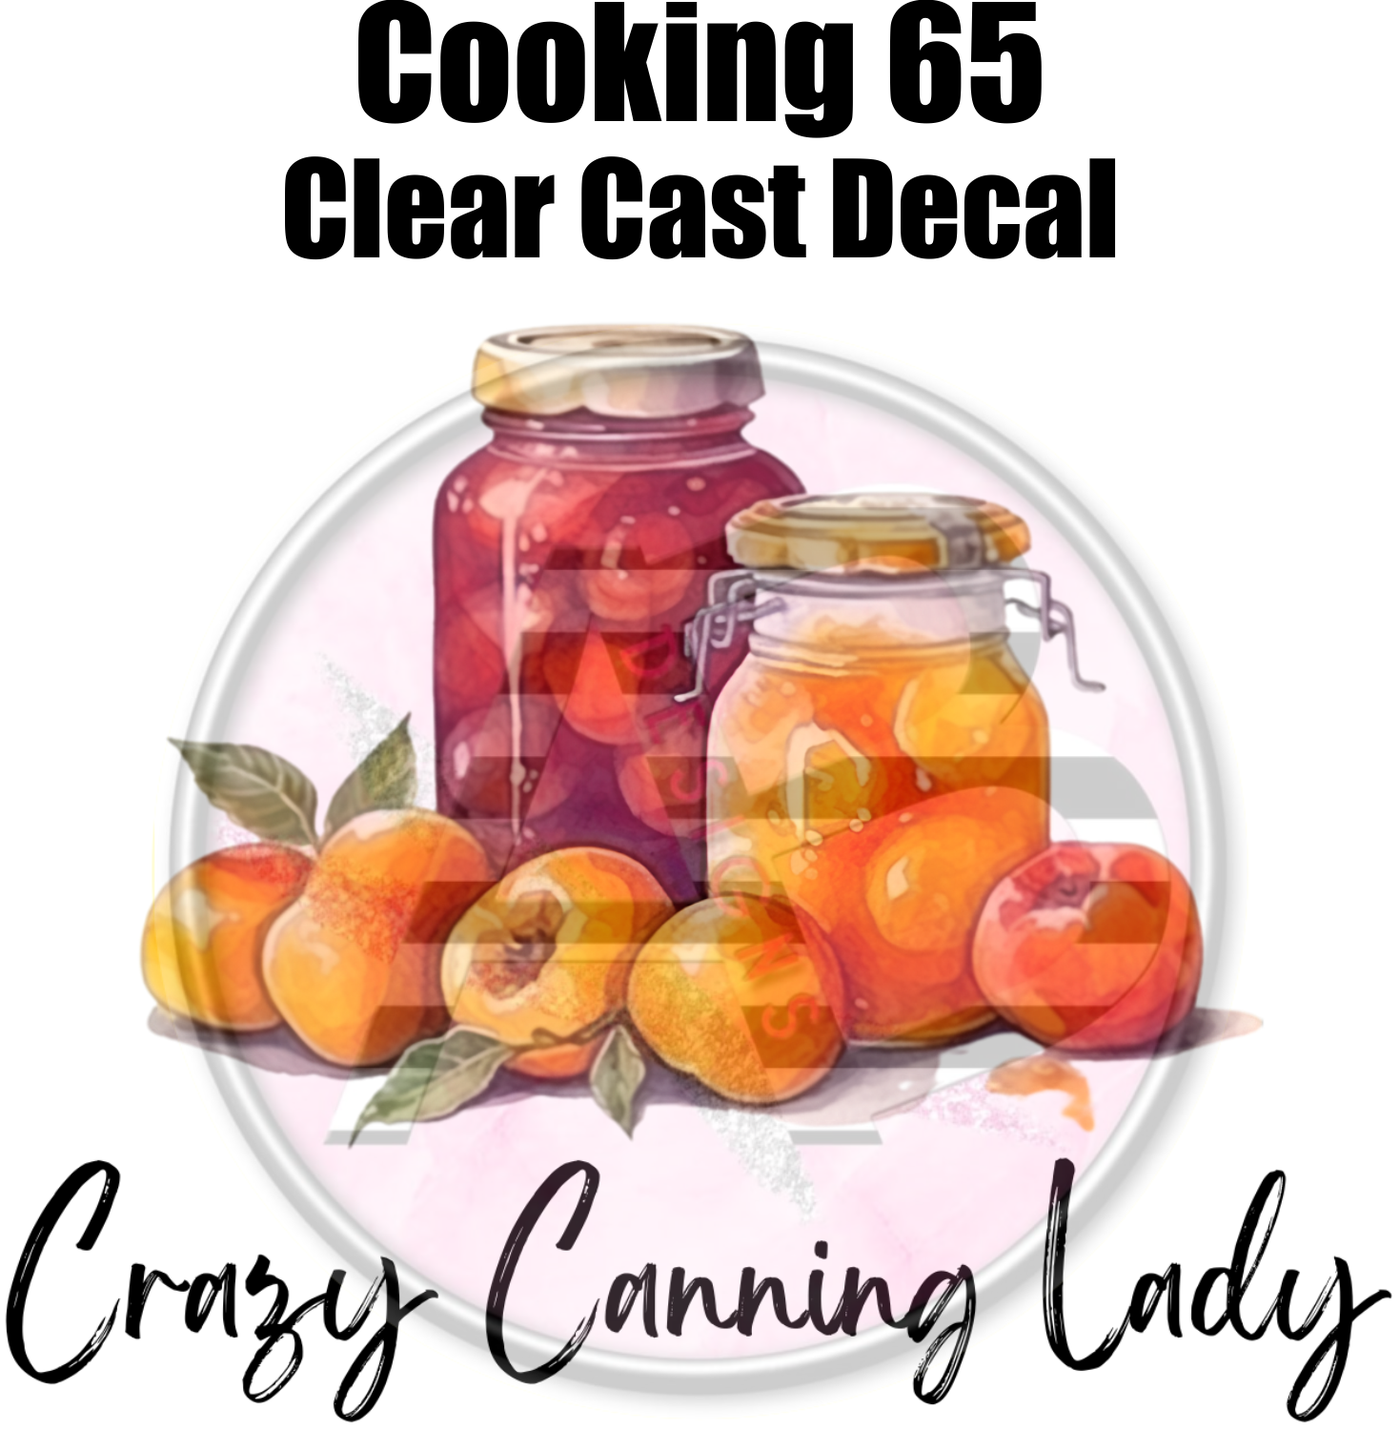 Cooking 65 - Clear Cast Decal - 292